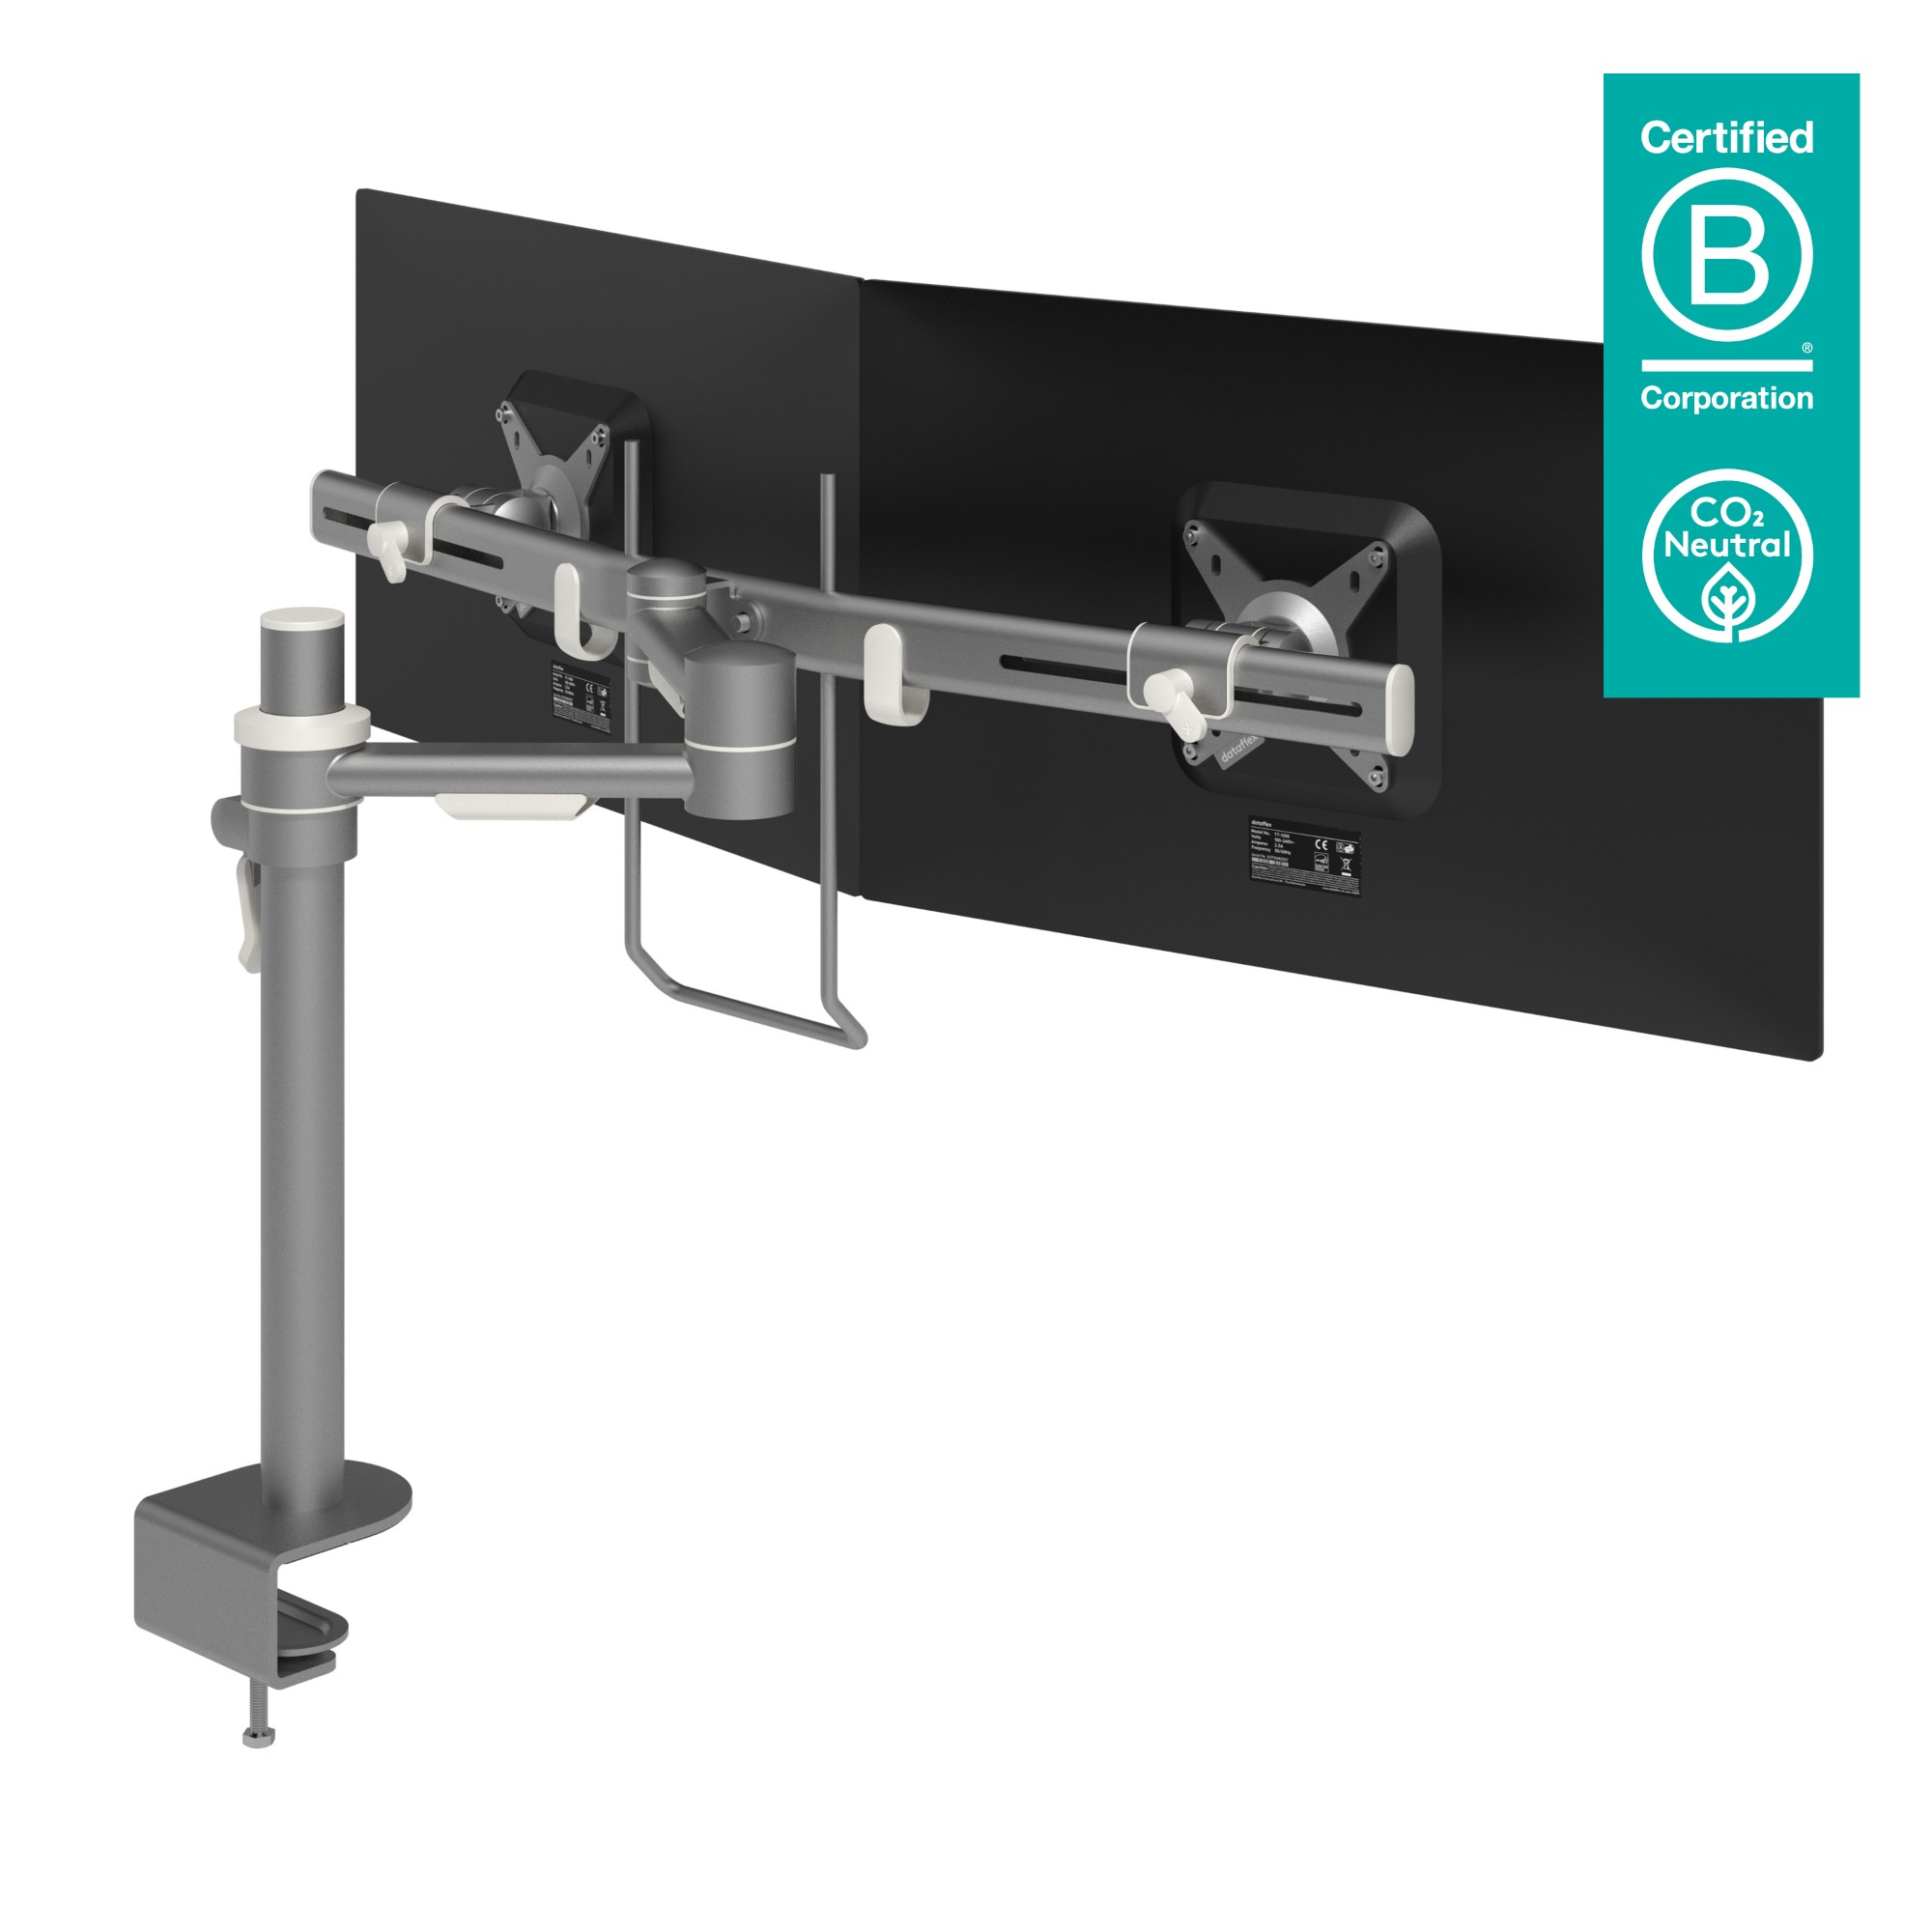 52.602 Dataflex Viewmate dual monitor arm - silver - desk clamp and bolt through mounts - depth adjustment